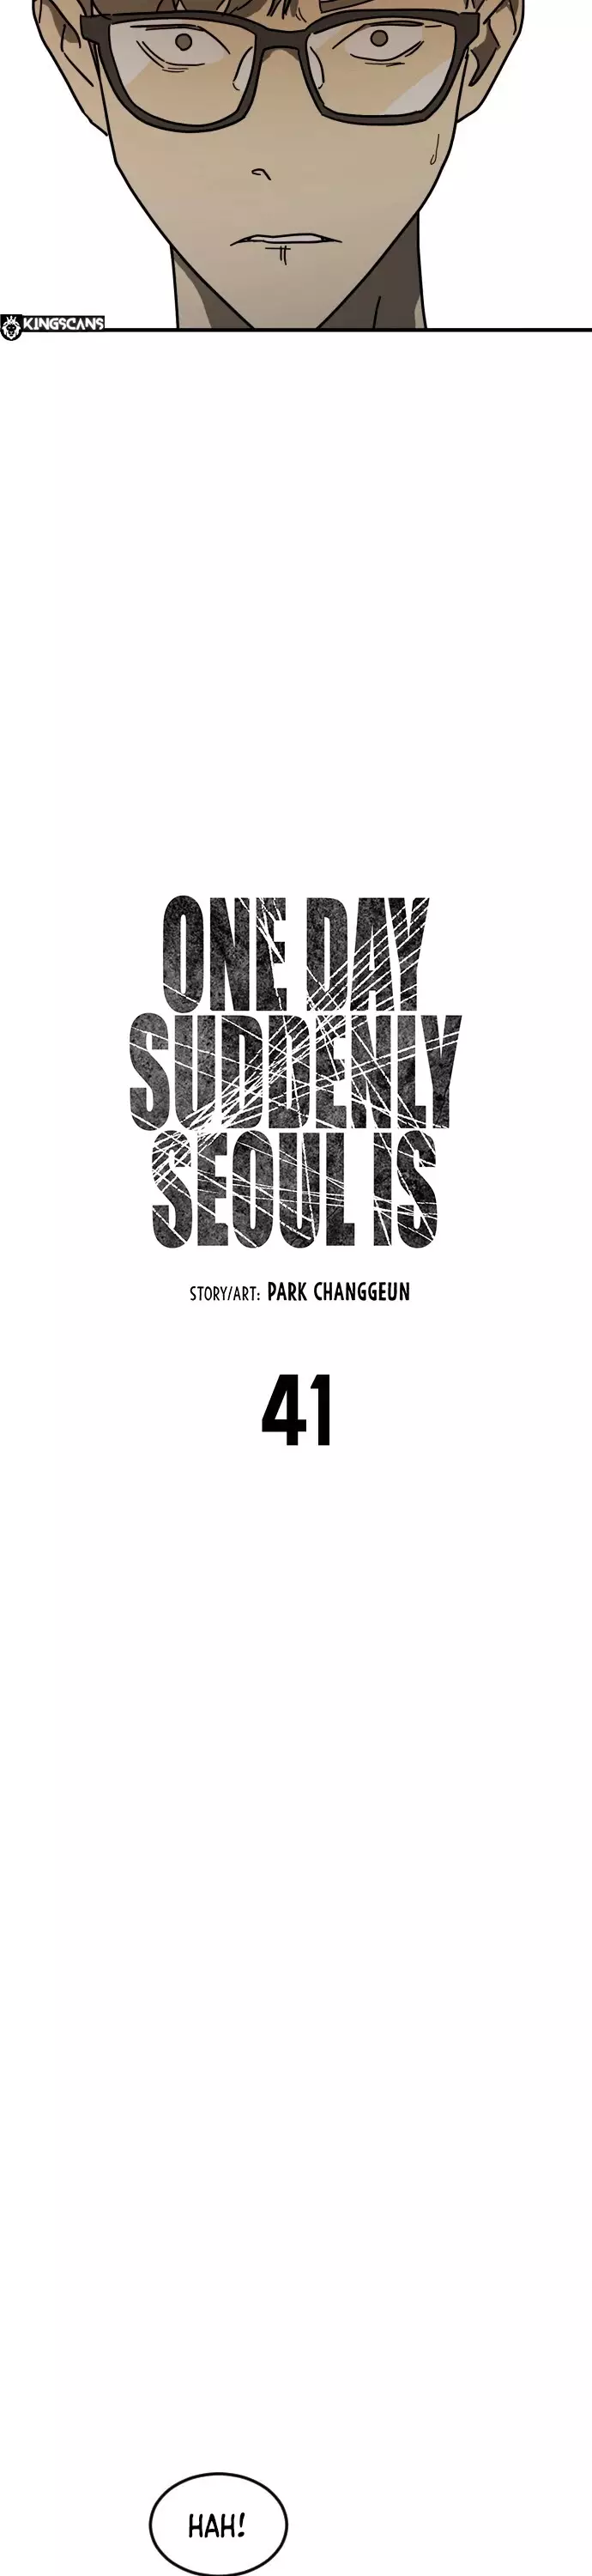 One Day, Suddenly, Seoul Is - 41 page 7-8a453858